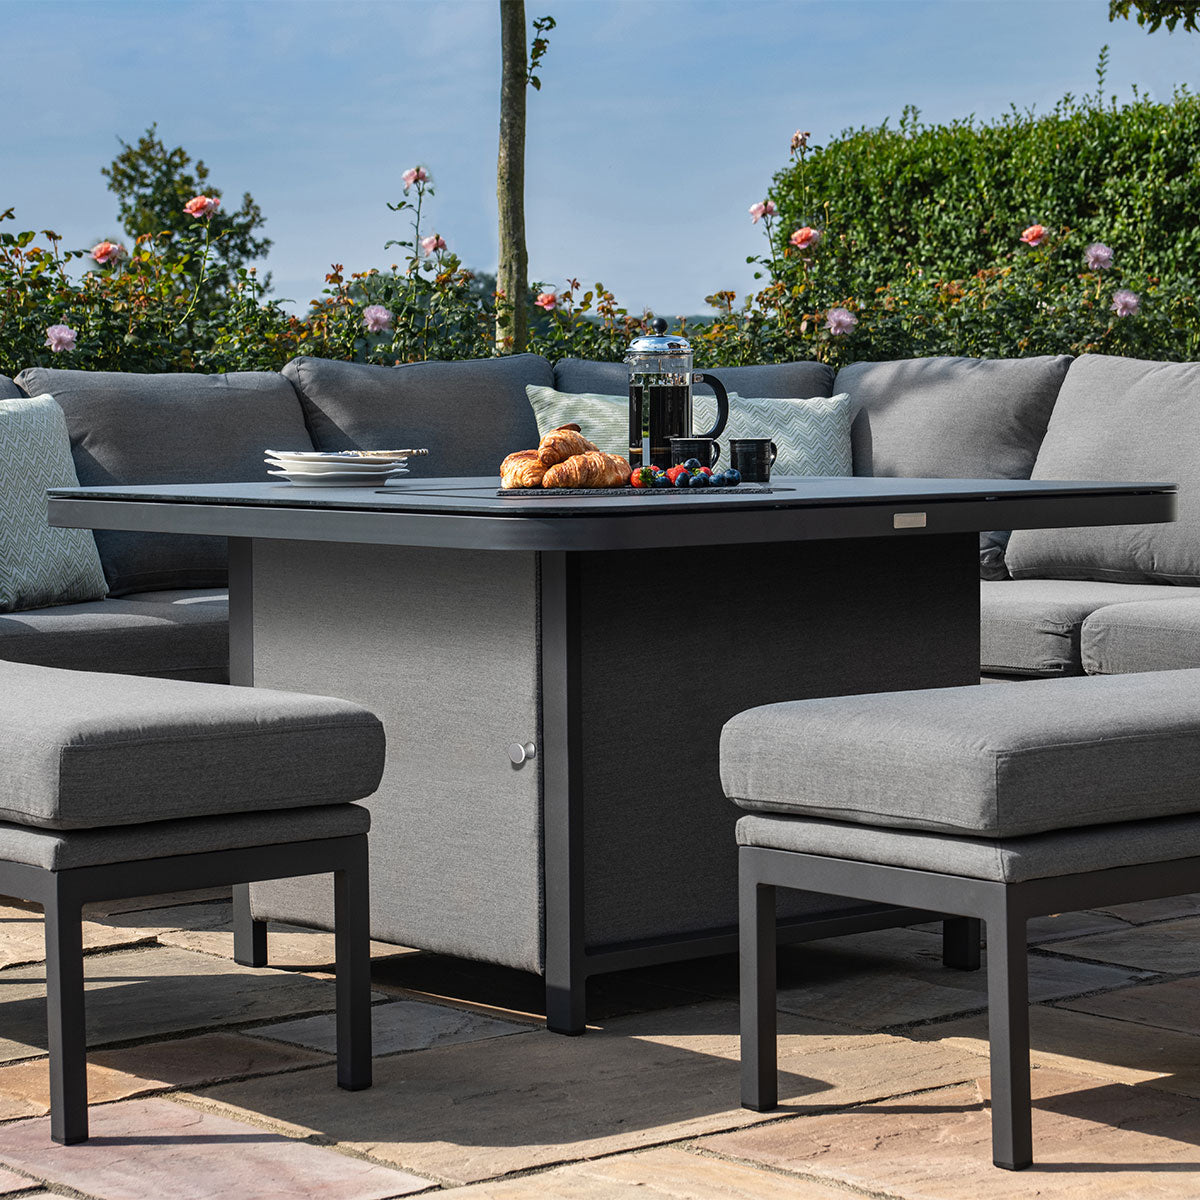 Maze - Outdoor Fabric Pulse Deluxe Square Corner Dining Set with Firepit Table - Flanelle